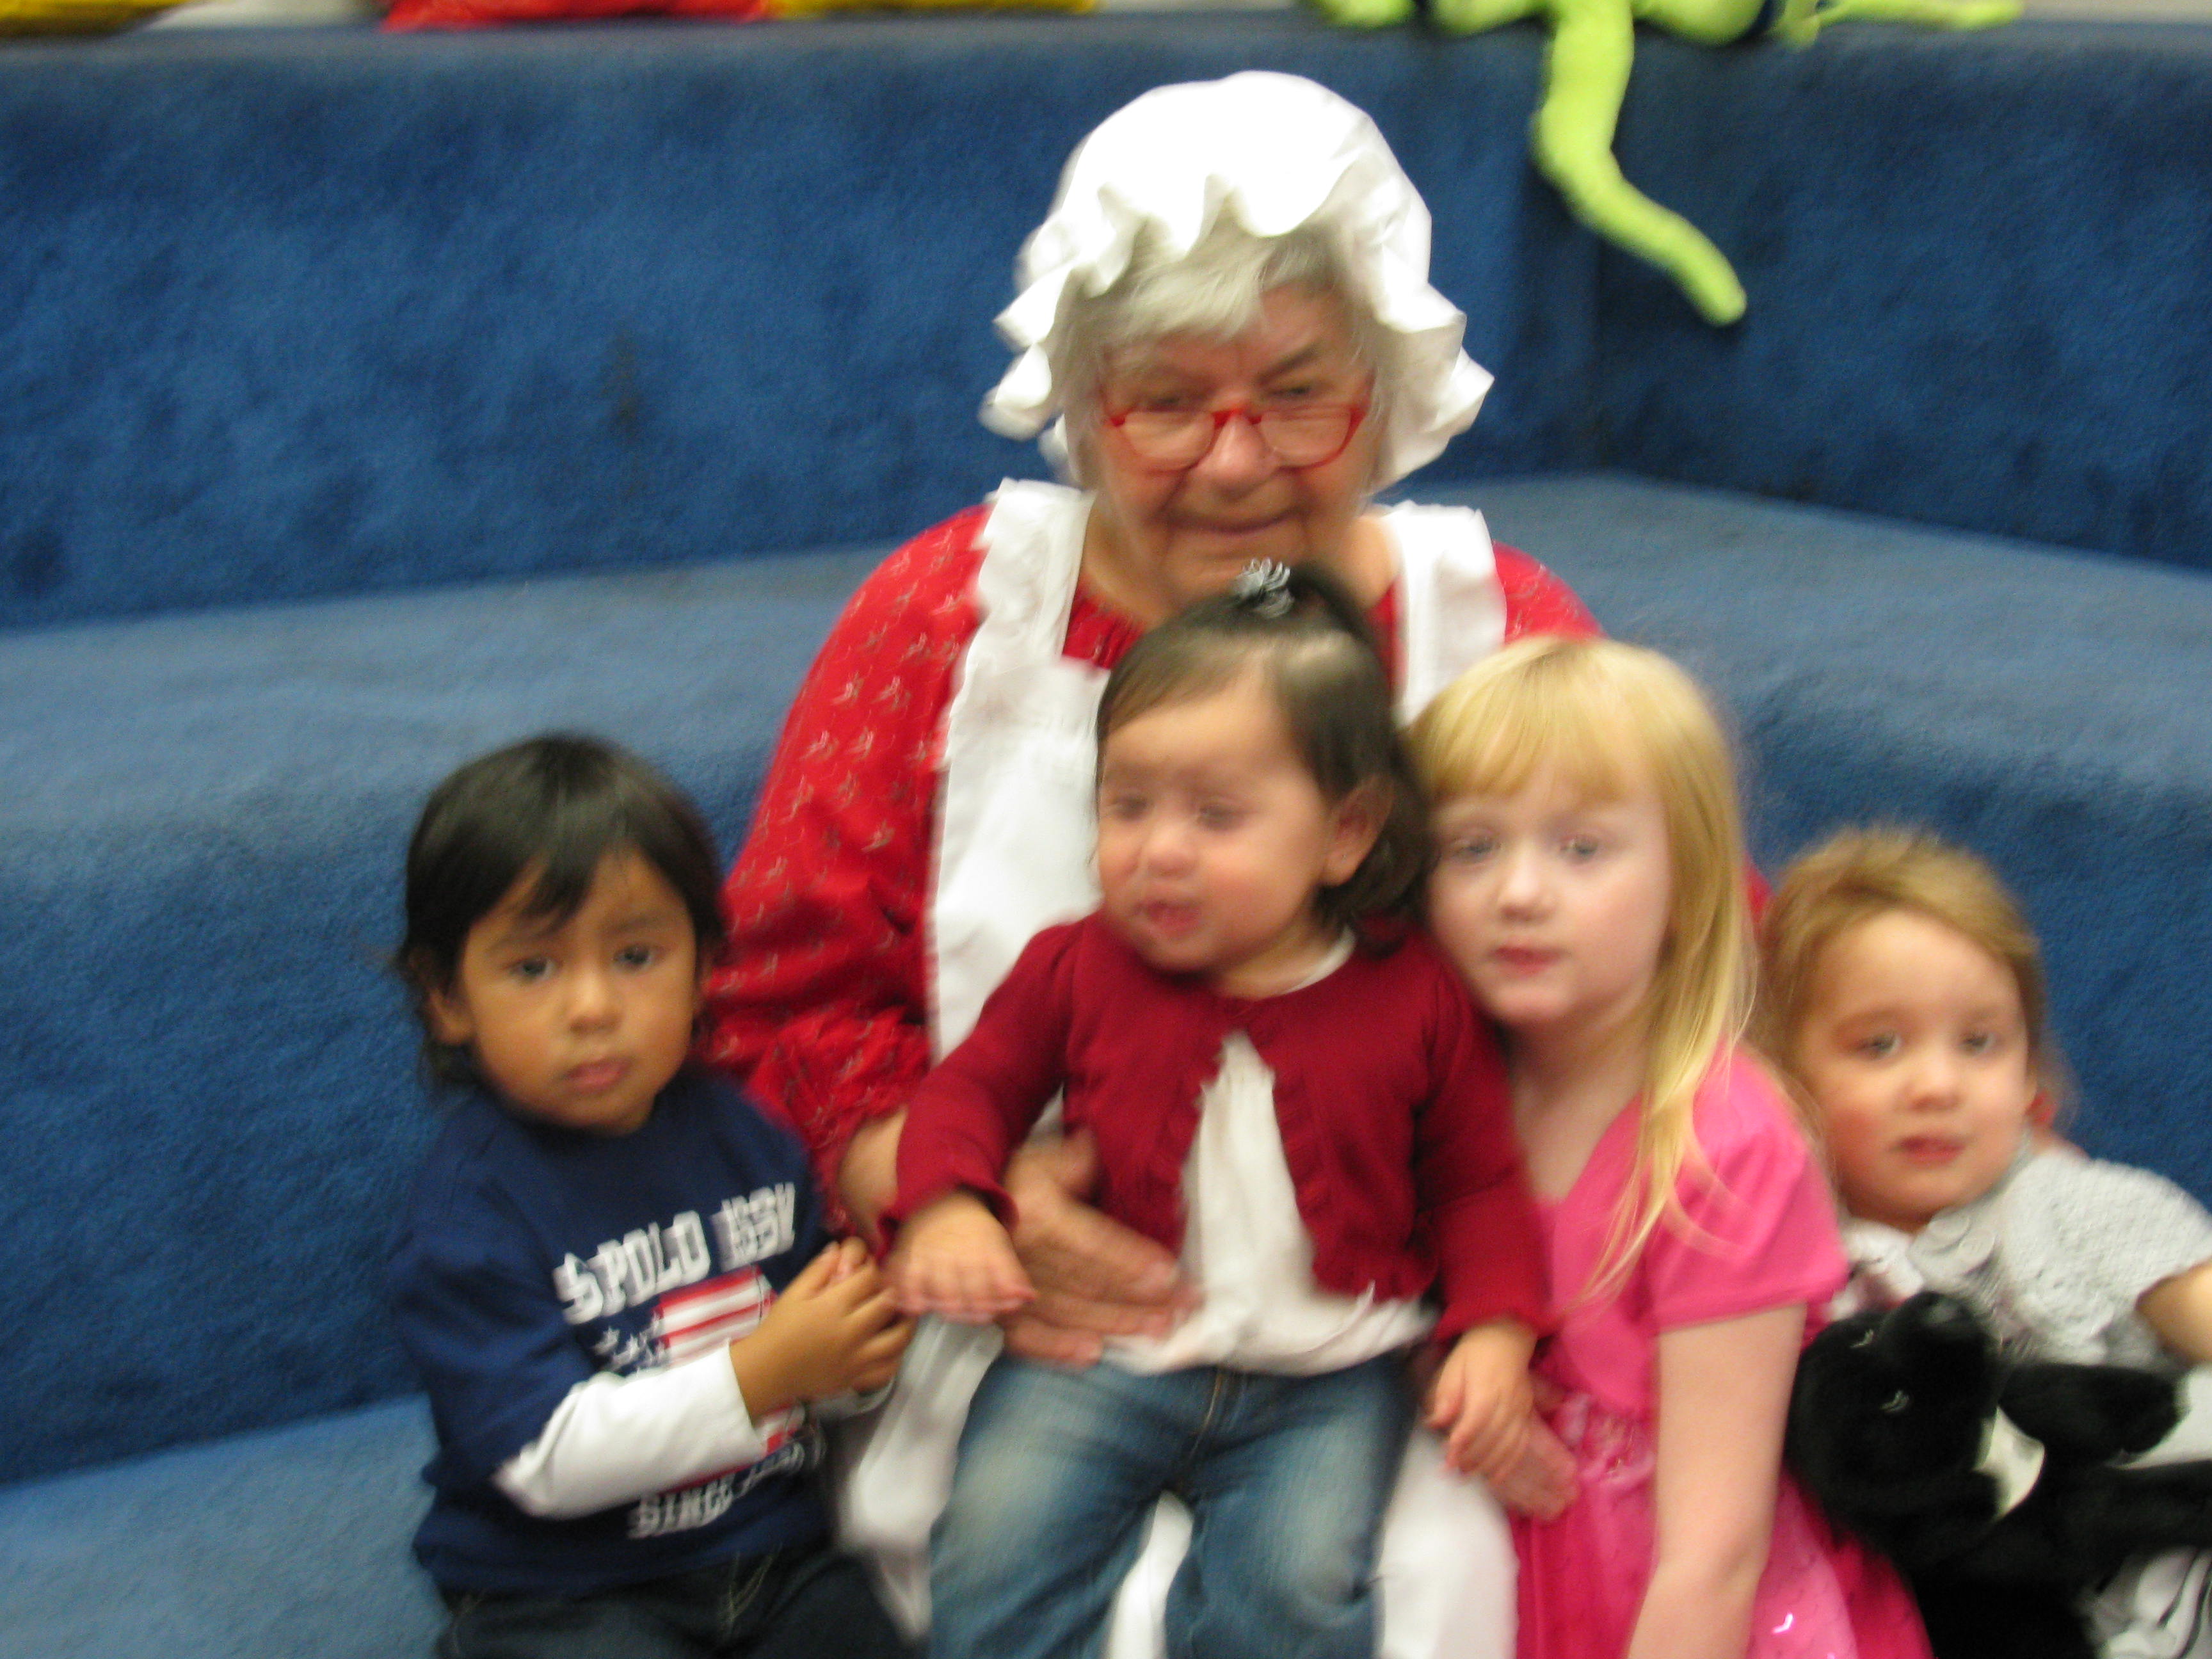 Our Story Time gang with Mrs. Clause